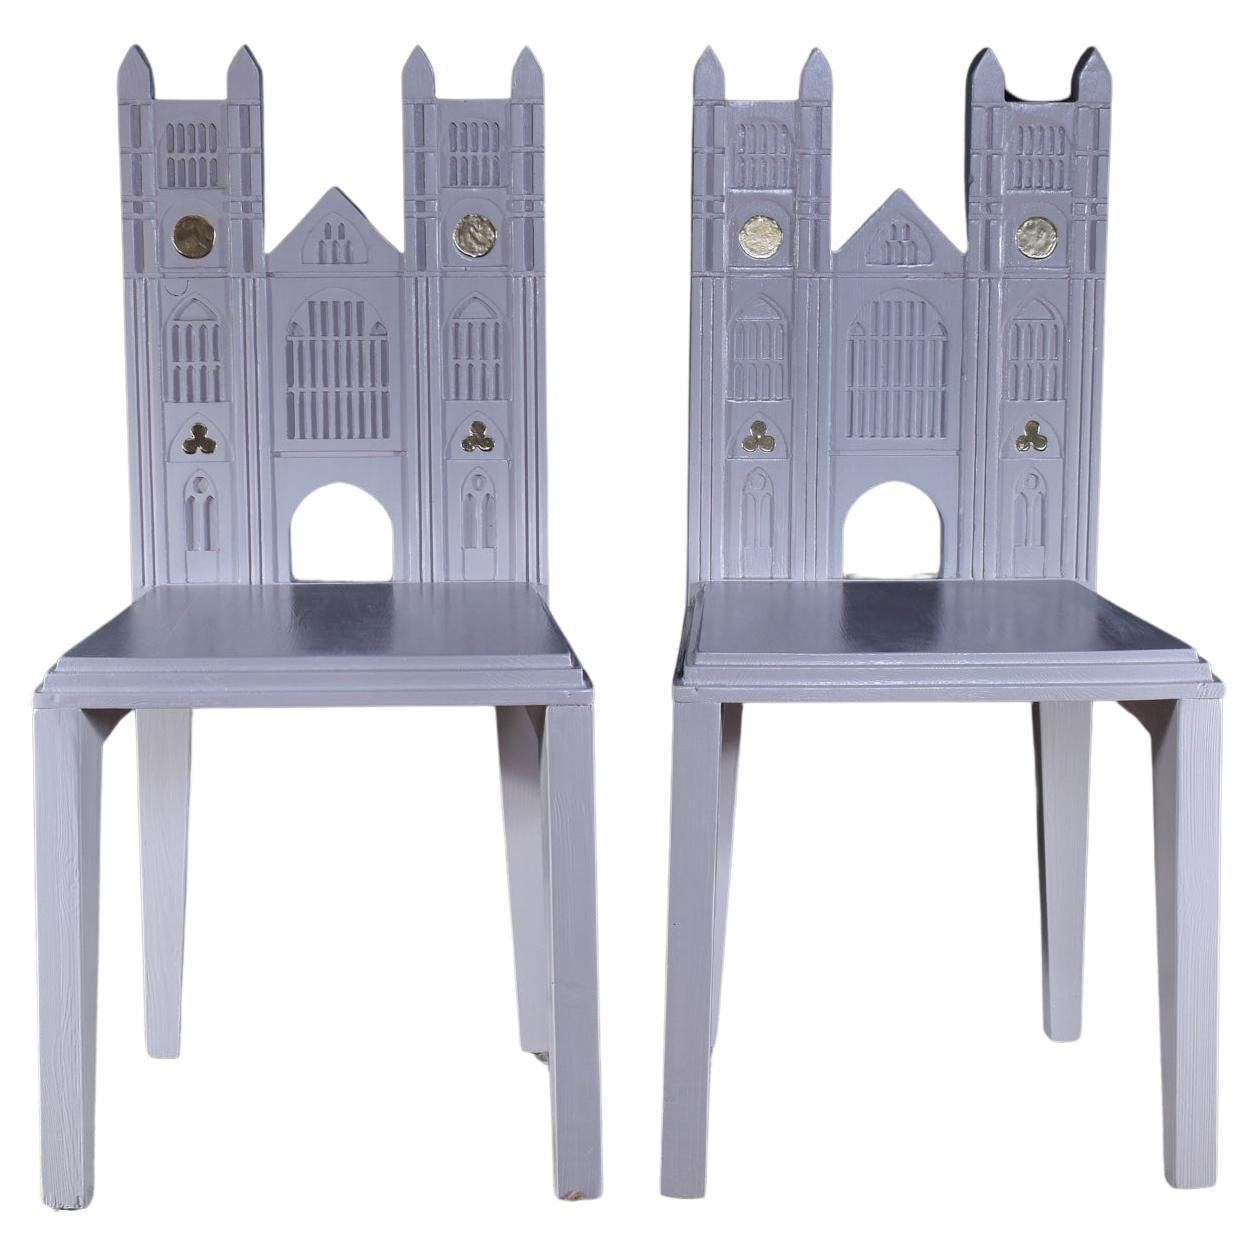 Cosimo De Vita Westminster Abbey Chairs For Sale